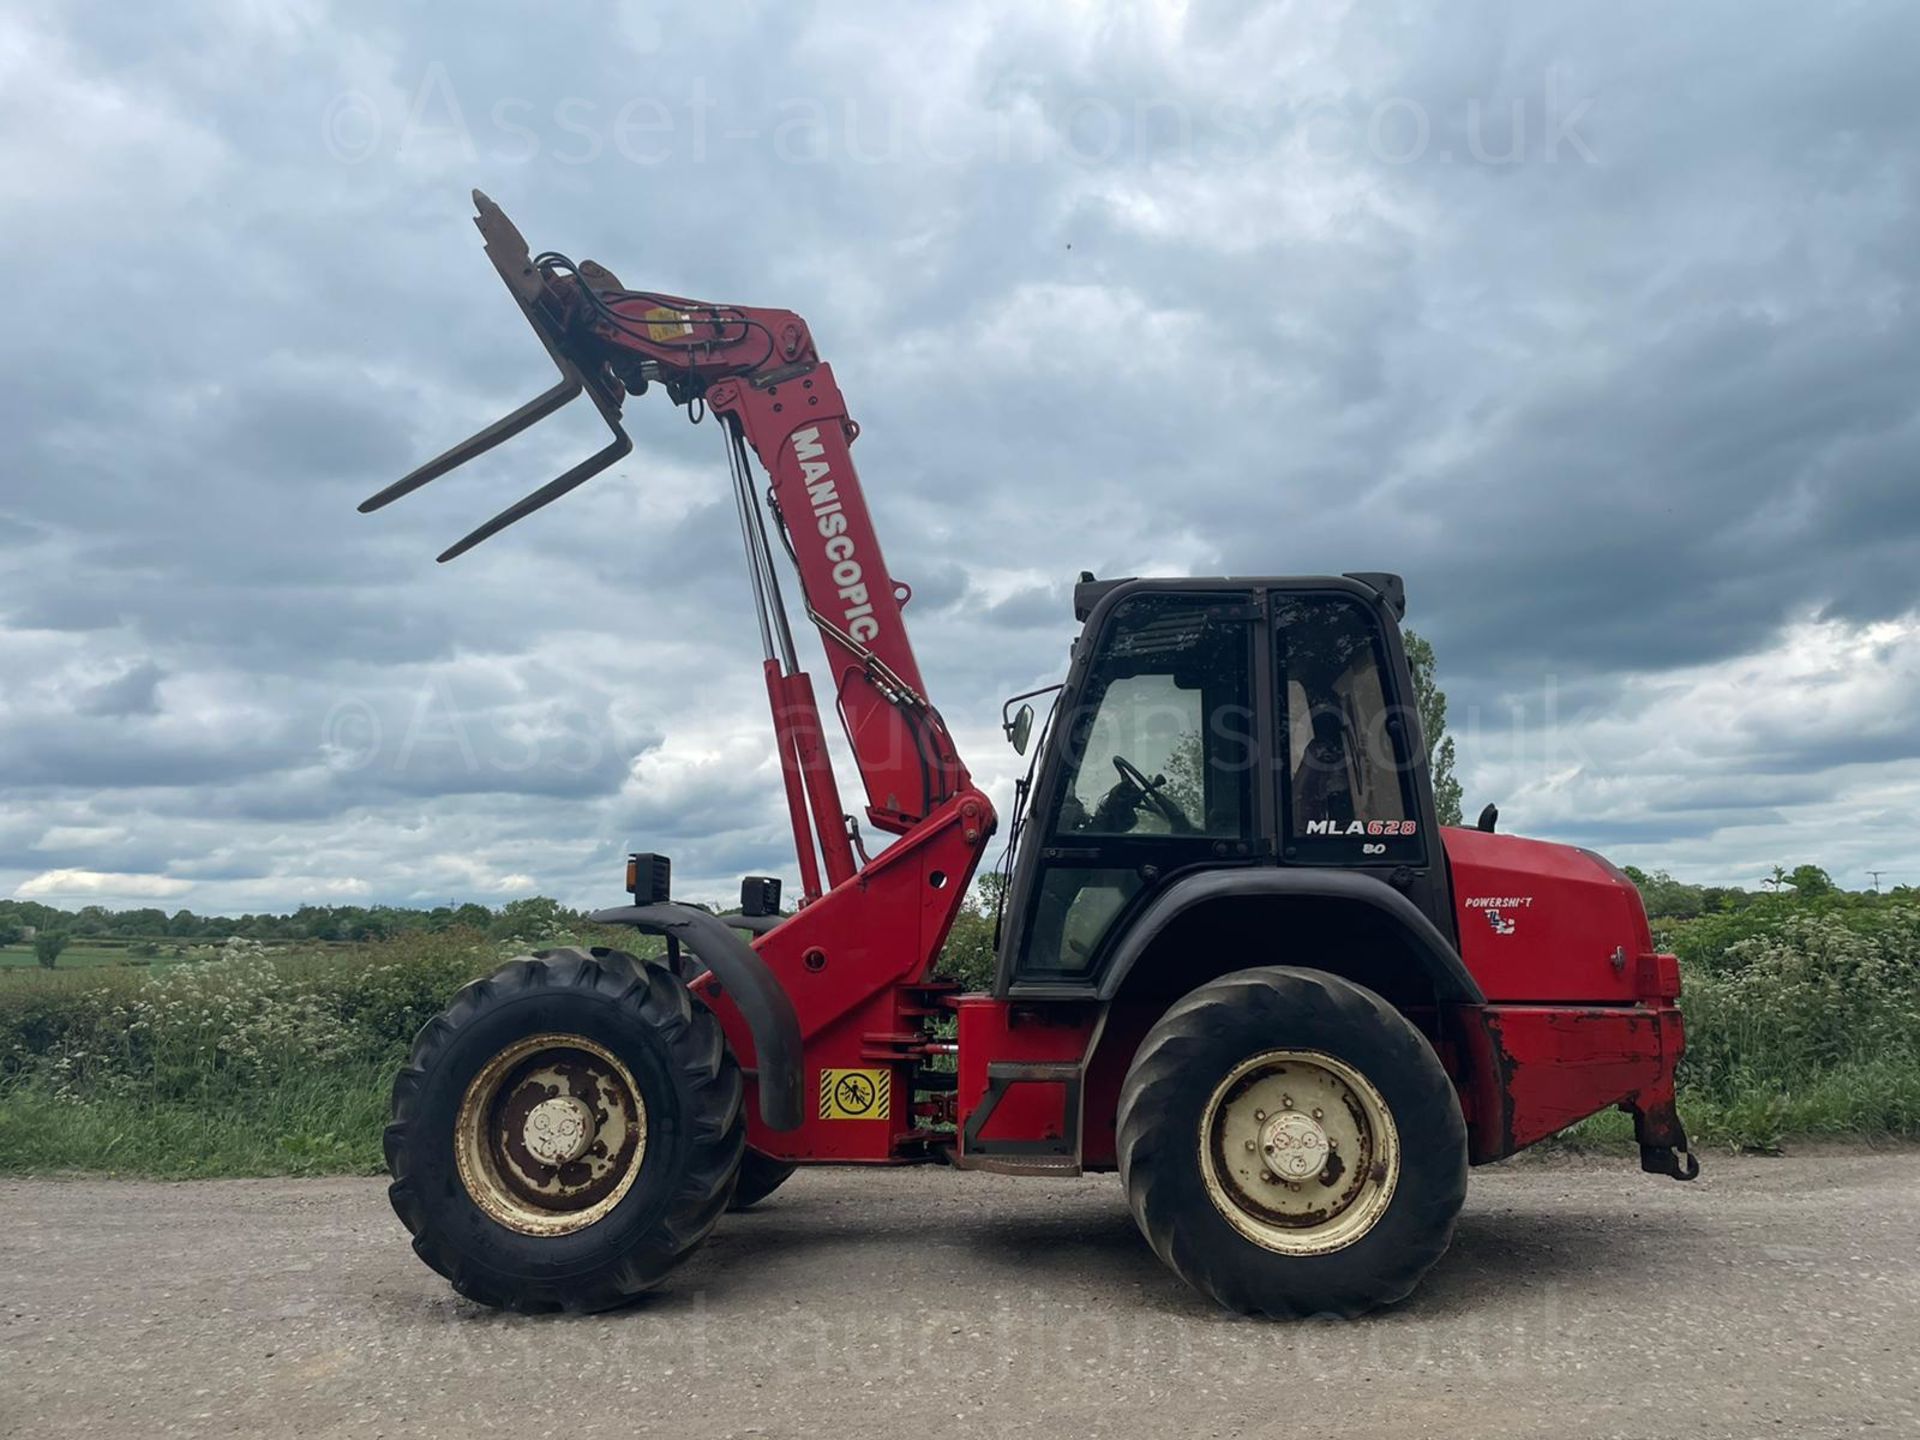 2000 MANITOU MLA 628 ARTICULATED TELESCOPIC TELEHANDLER, RUNS DRIVES AND LIFTS *PLUS VAT* - Image 2 of 13